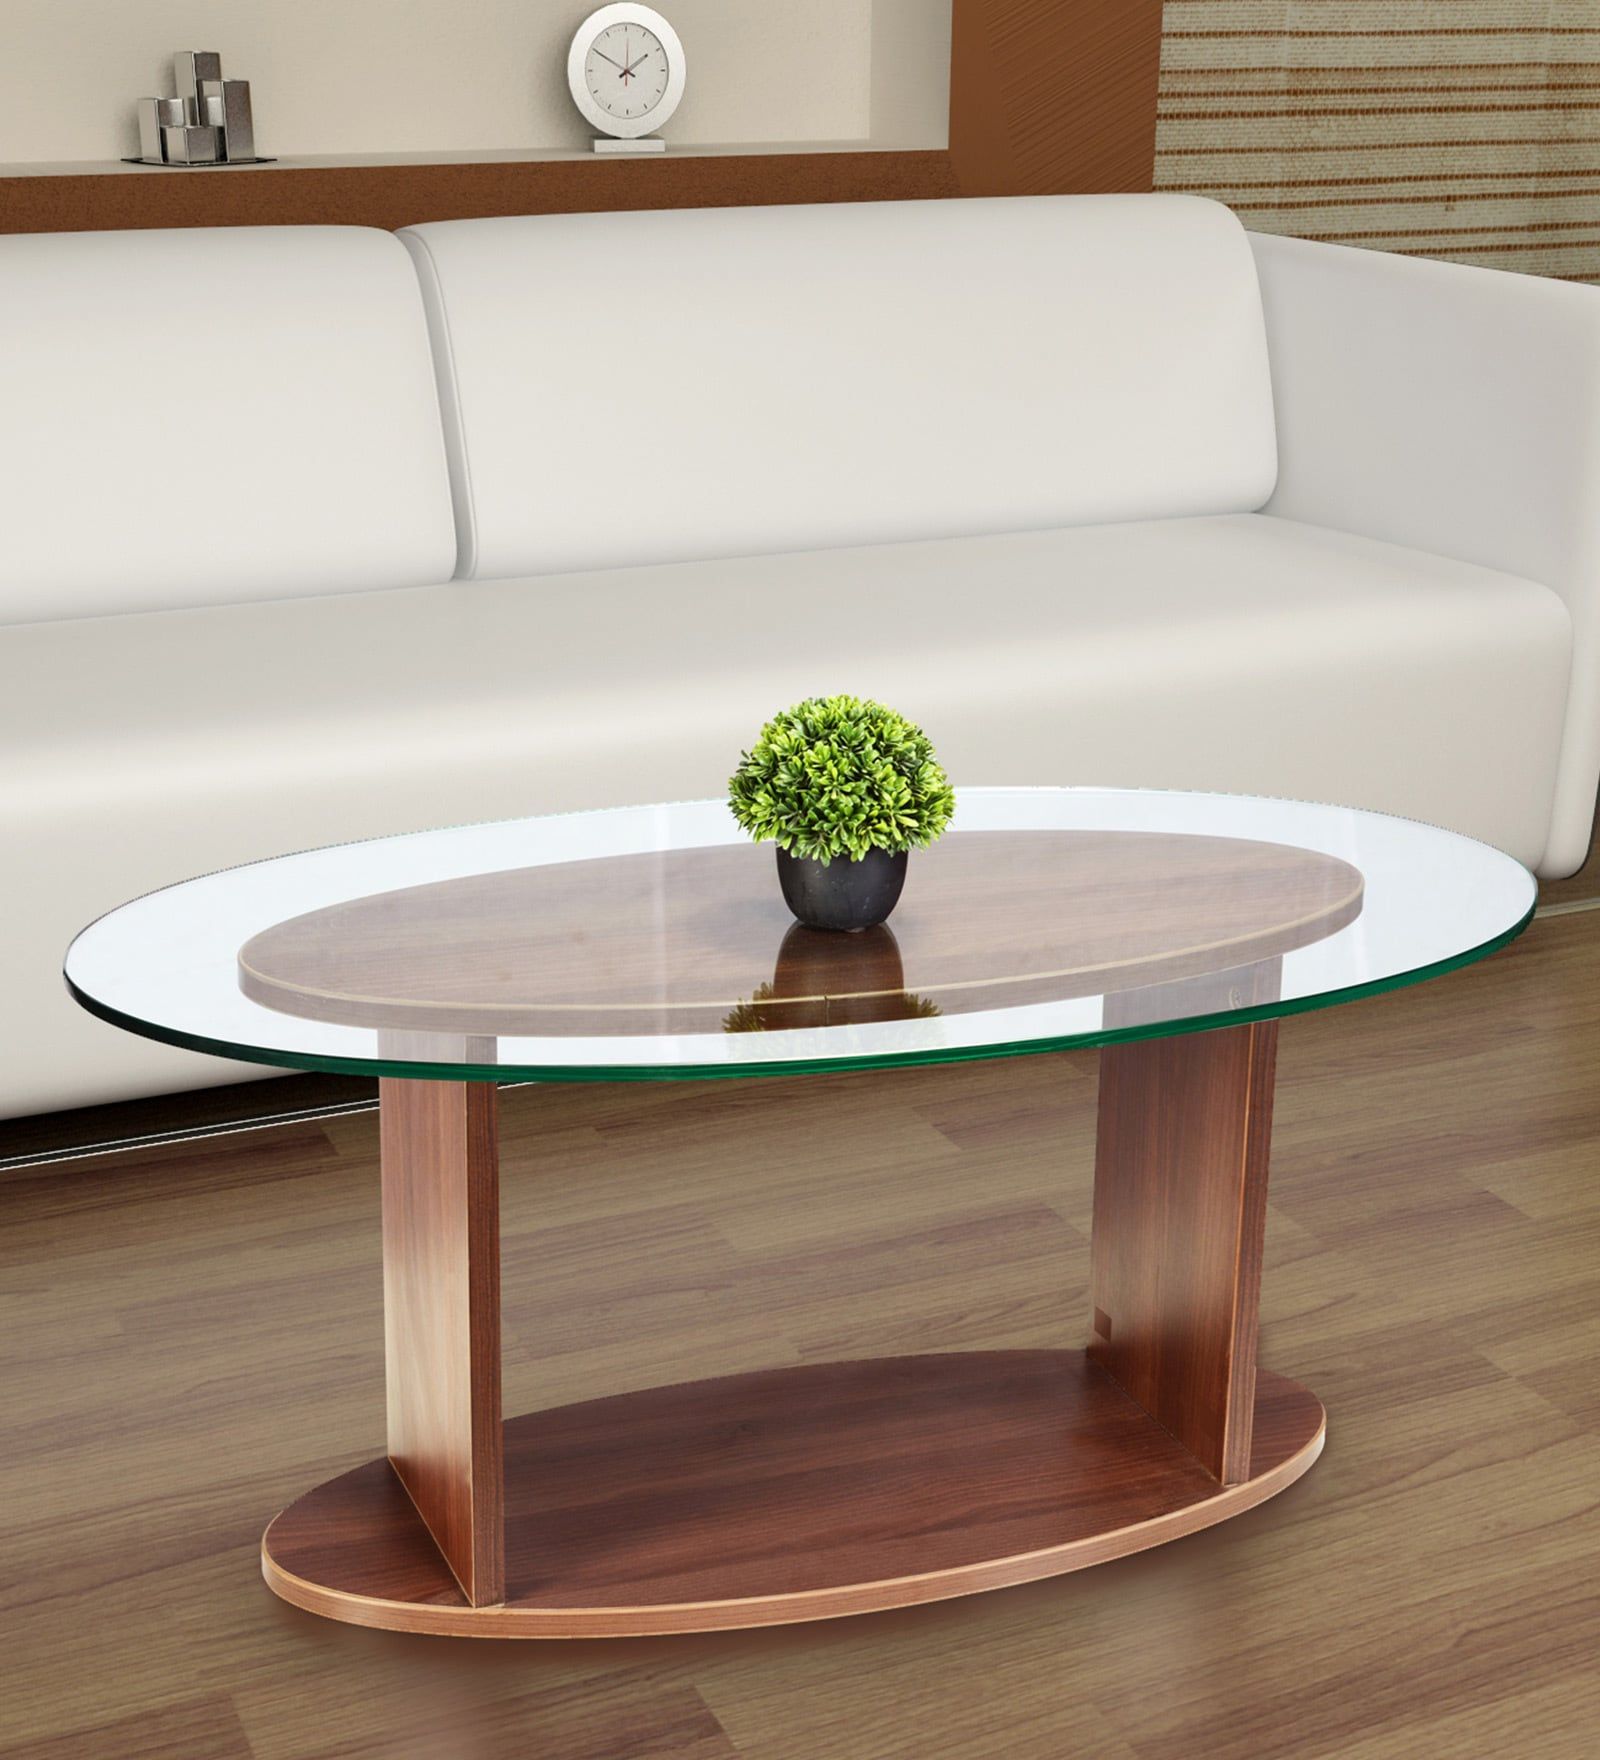 Buy Oval Shaped Glass Top Coffee Table In Walnut Finishaddy Design With Regard To Tempered Glass Oval Side Tables (View 9 of 20)